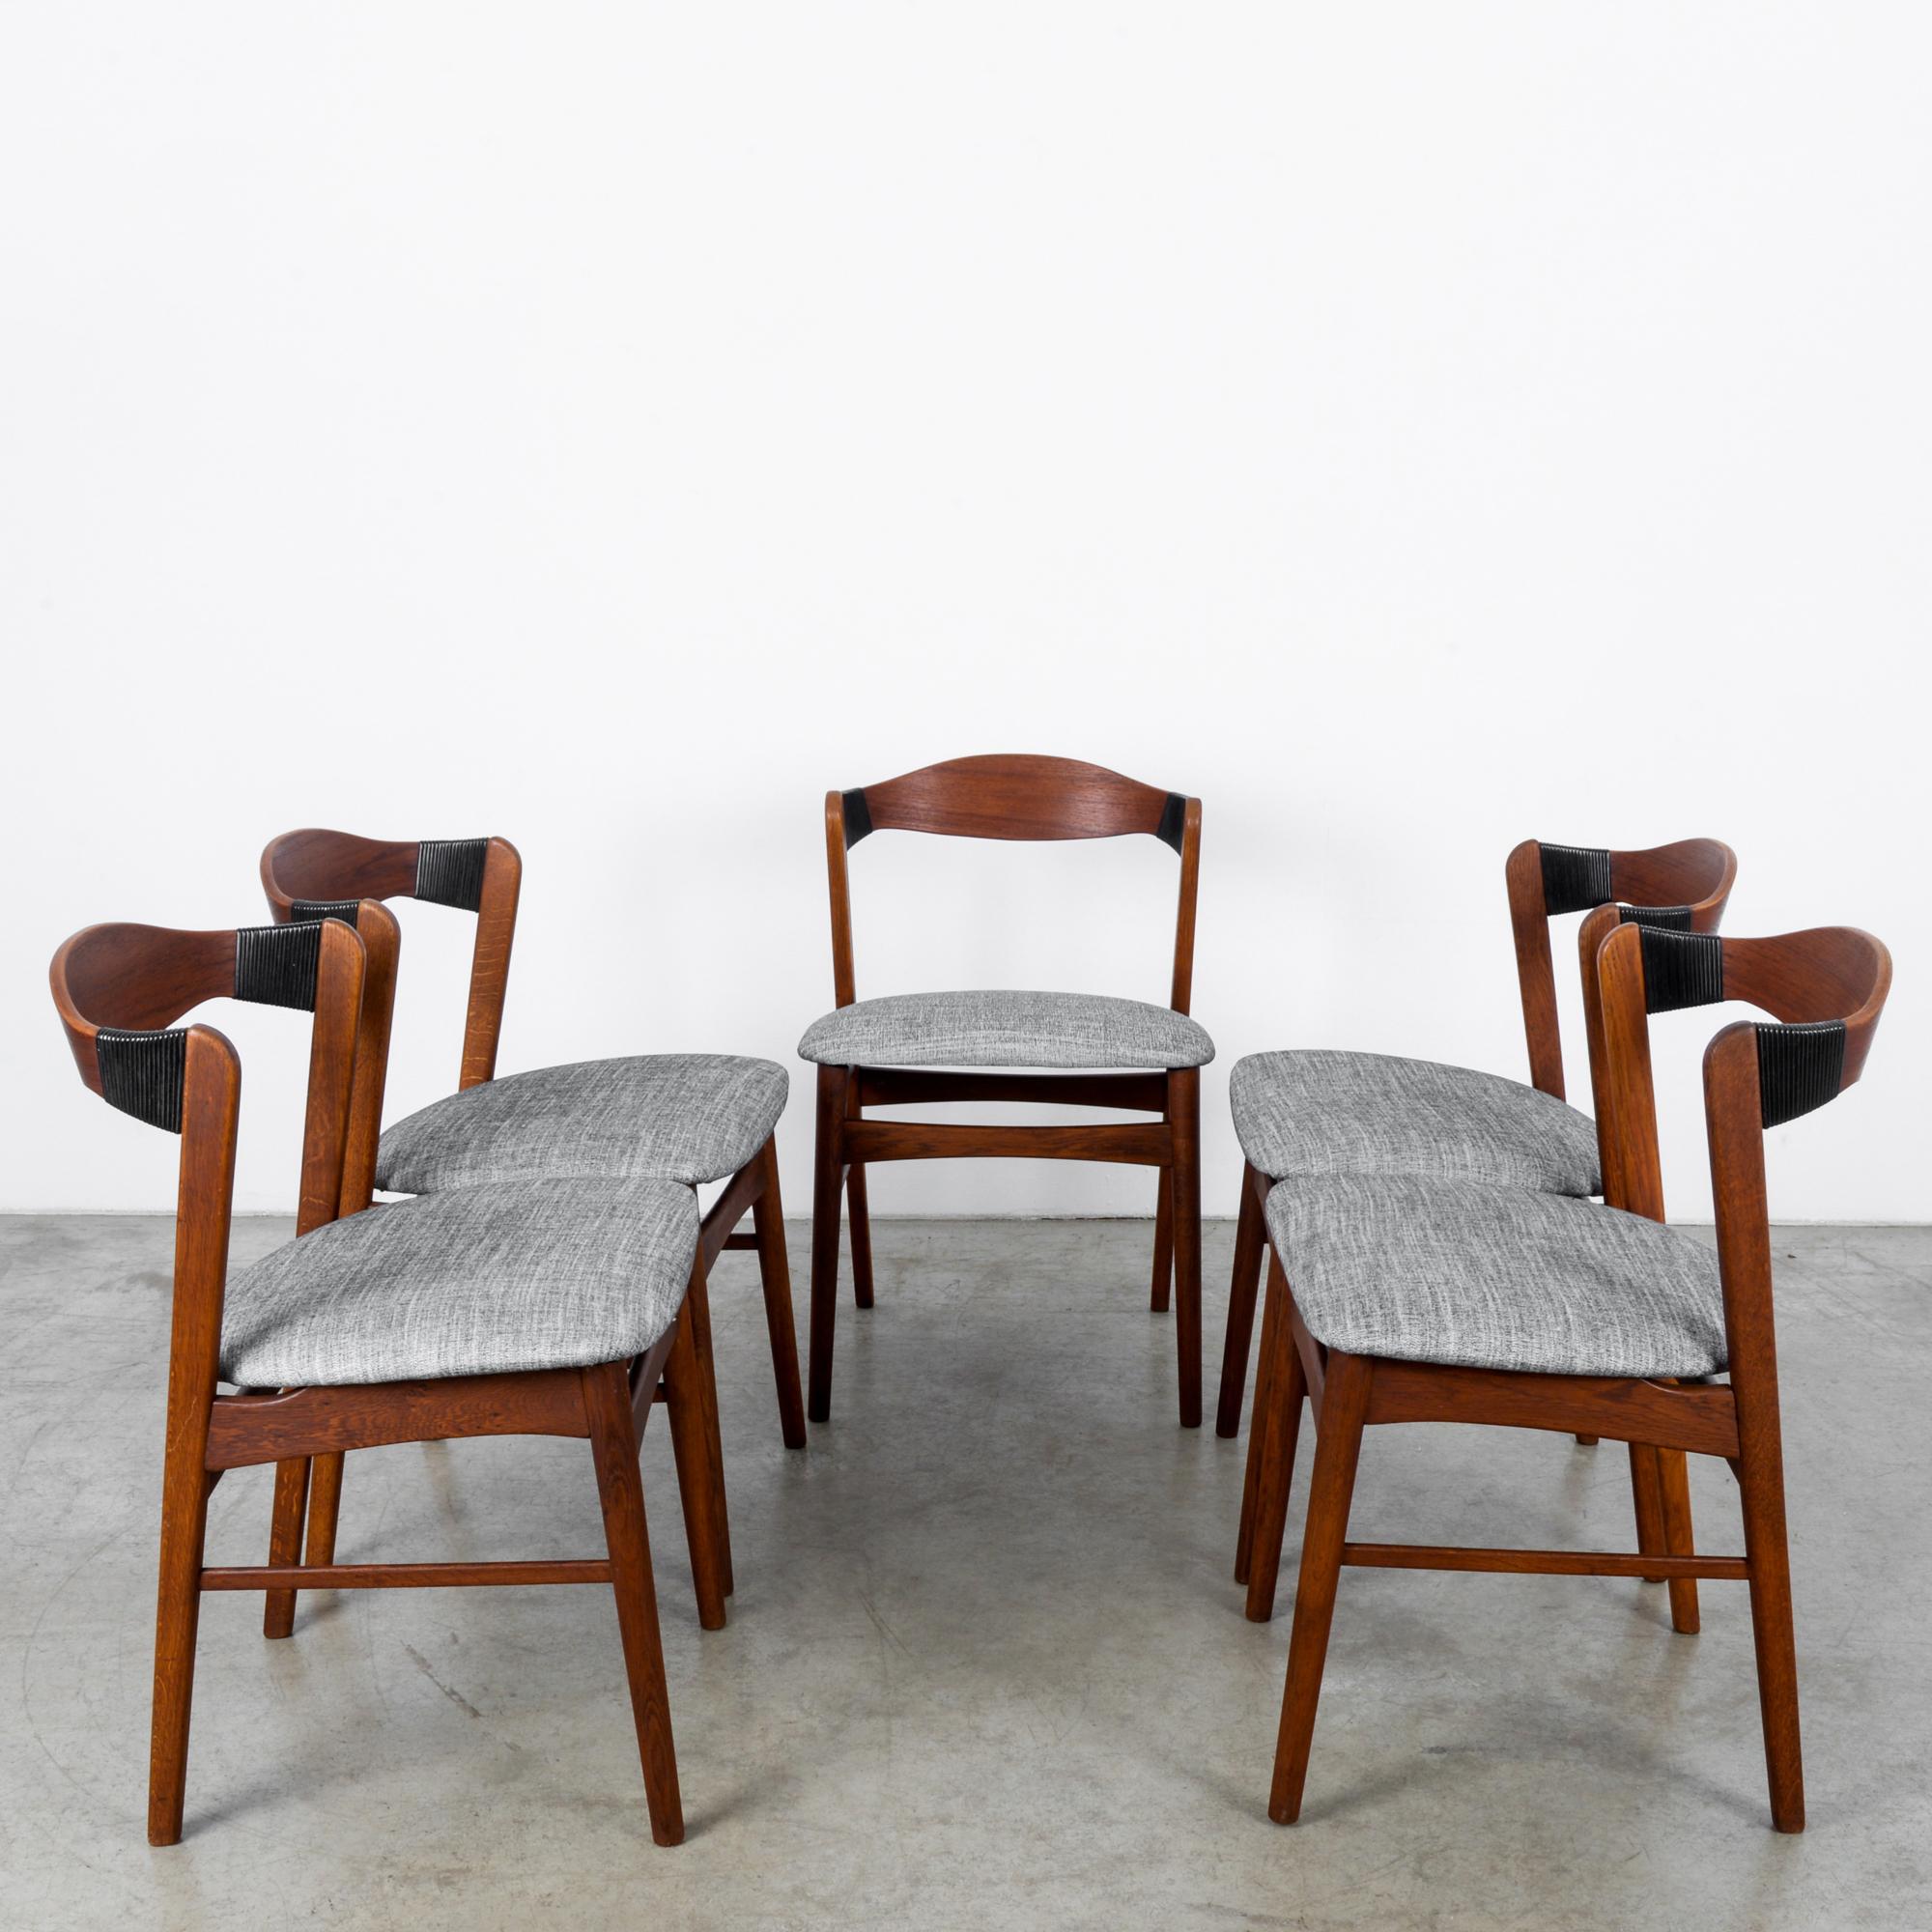 1960s Danish Teak Chairs with Upholstered Seats, Set of Five 10